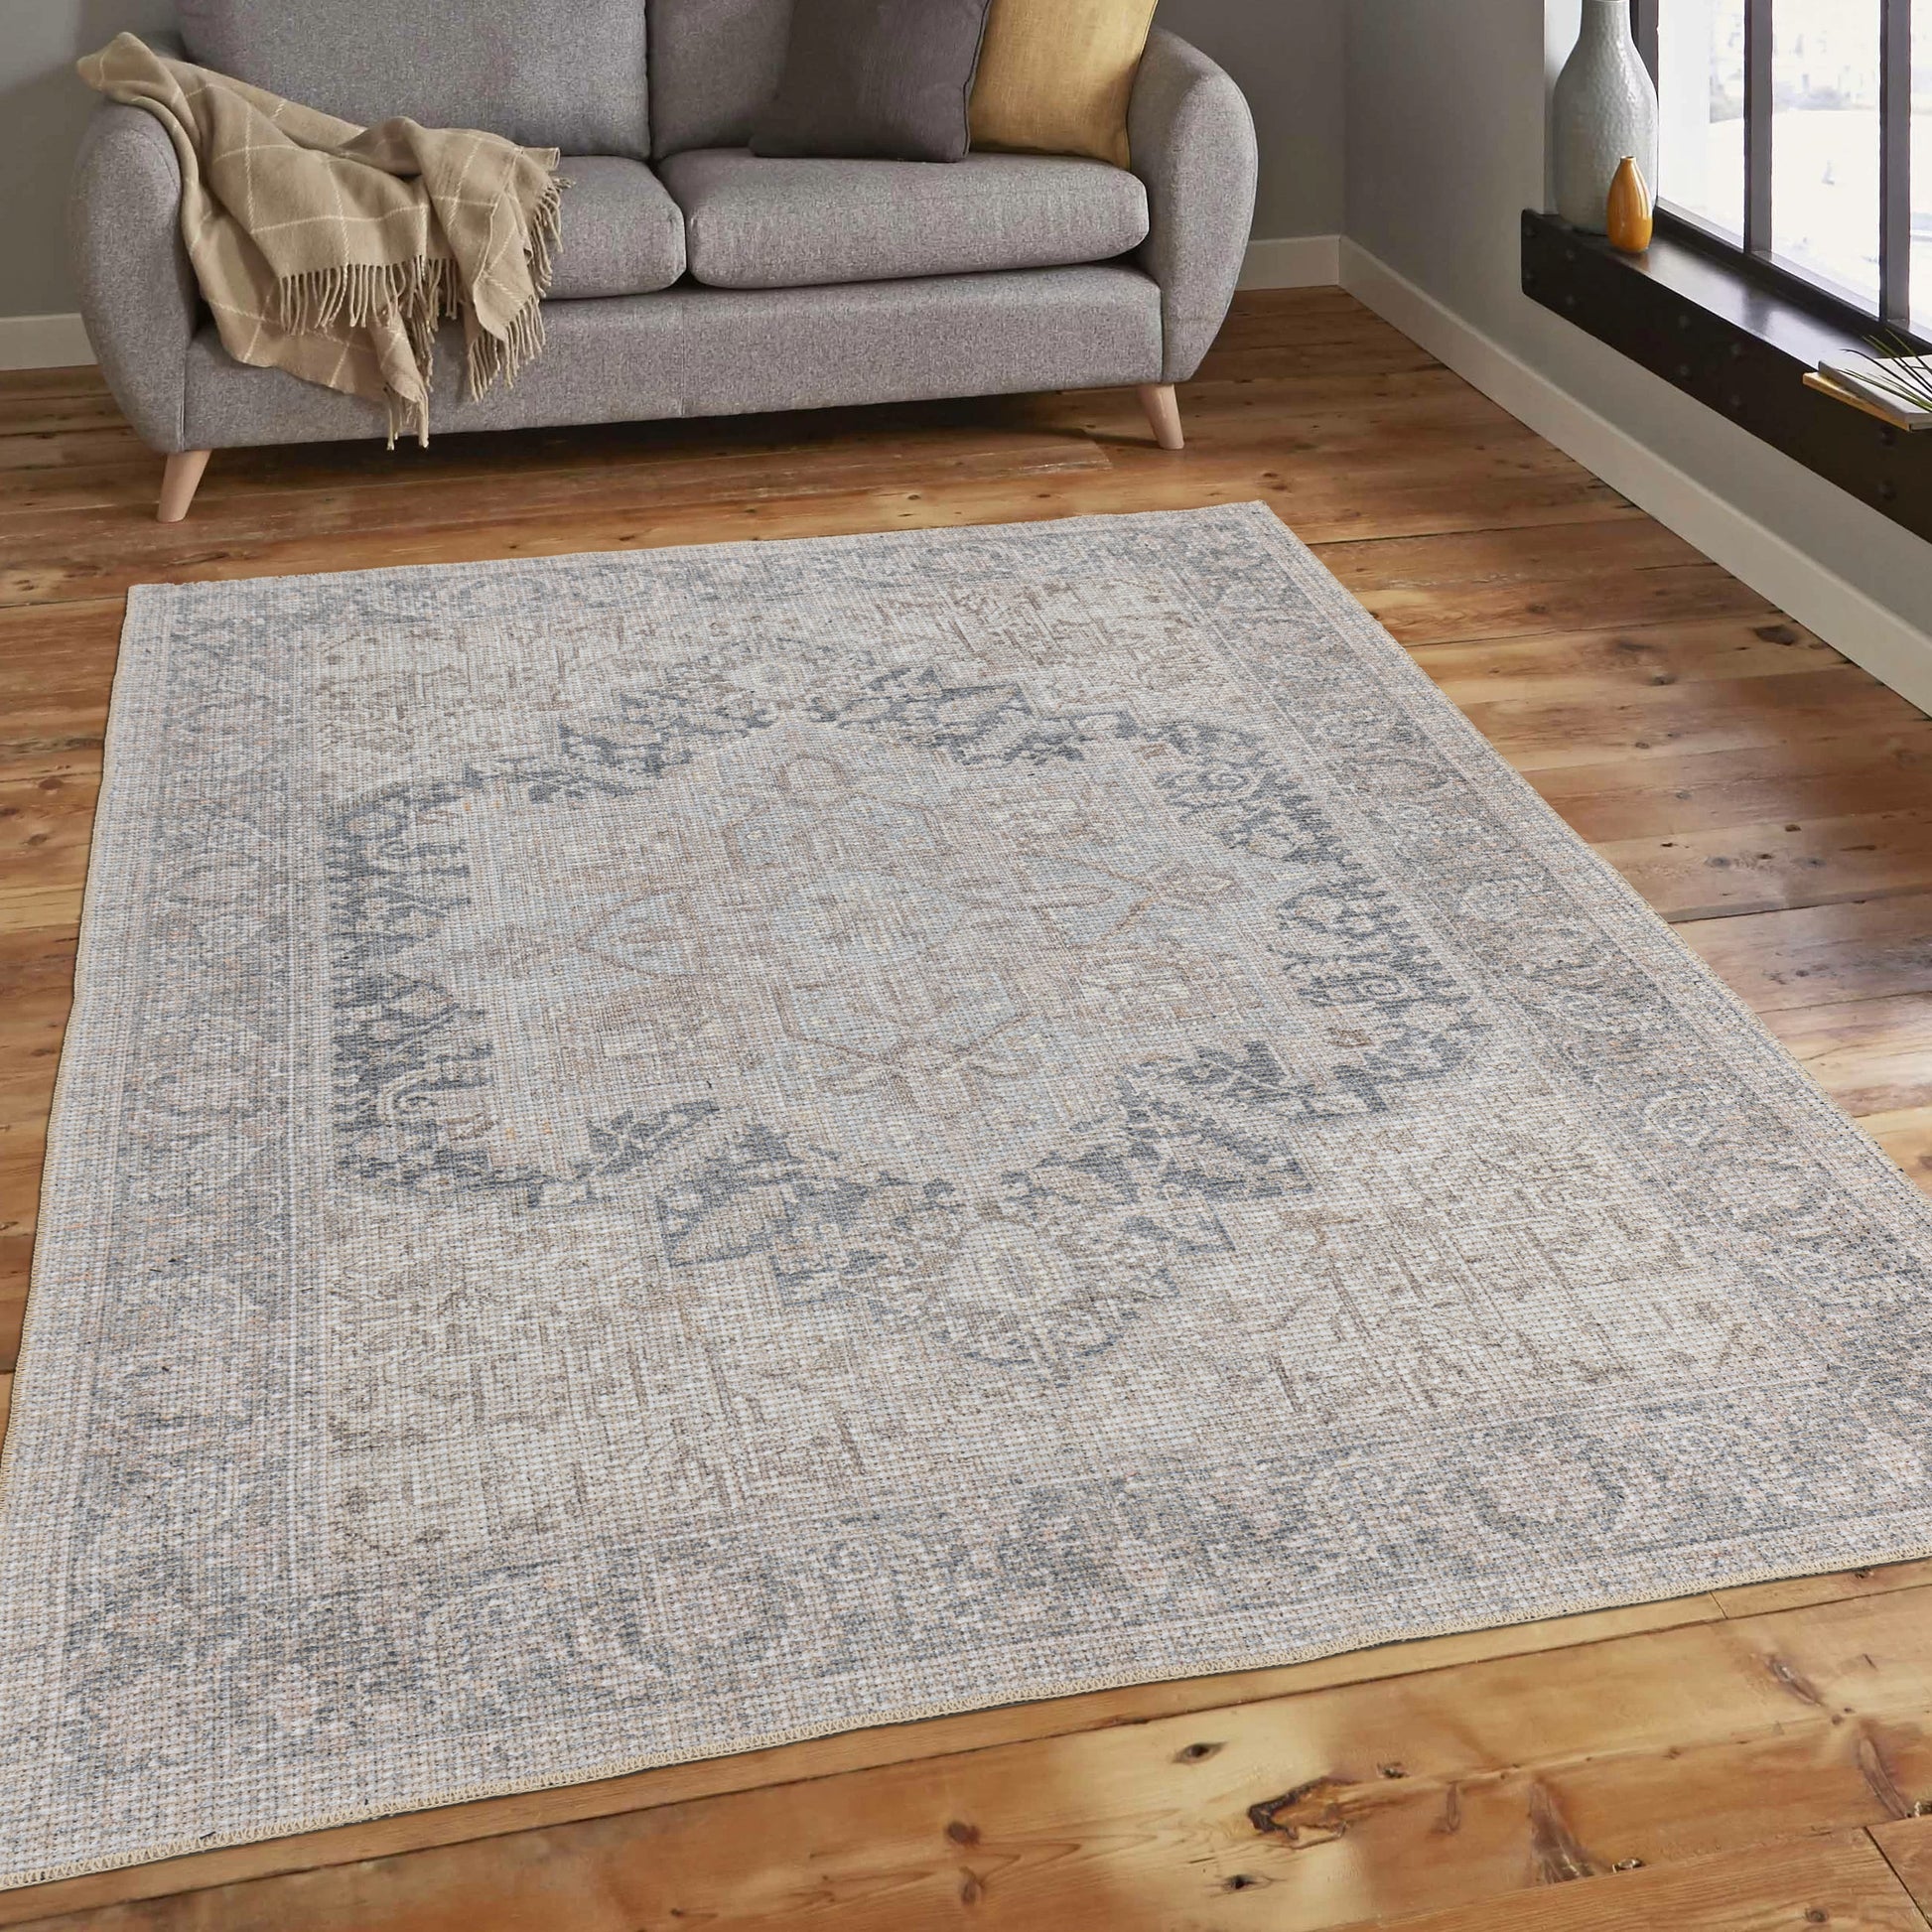 grey blue medallion cotton and polyster machine washable traditional rustic area rug 6x8, 6x9 ft Living Room, Bedroom, Dining Area, Kitchen Carpet